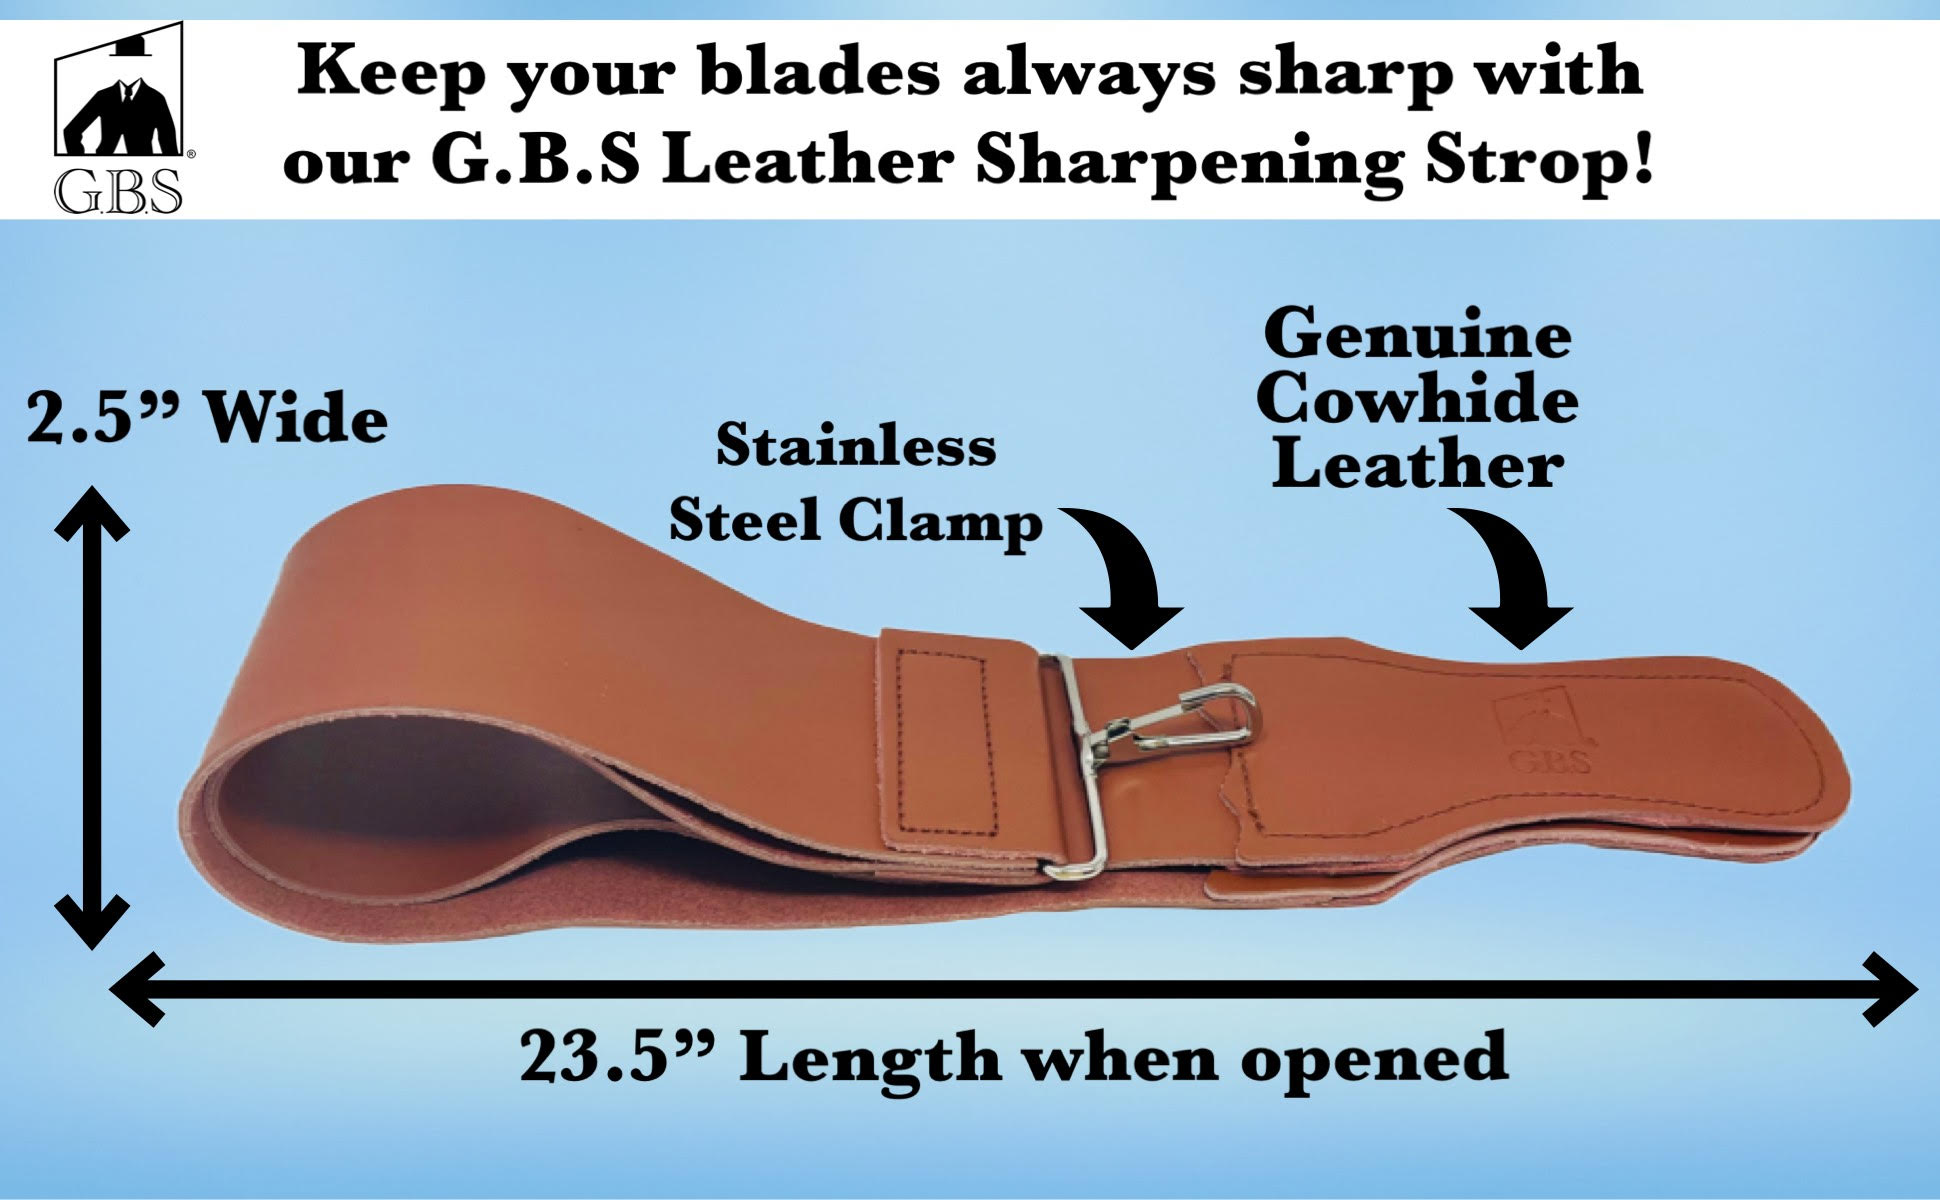 G.B.S Straight Razor Leather Strop Sharpening Strap 2.5 X 23.5 Grain  Cowhide- Dual Straps with Swivel Used for Sharpening Razor Knife and  Kitchen 